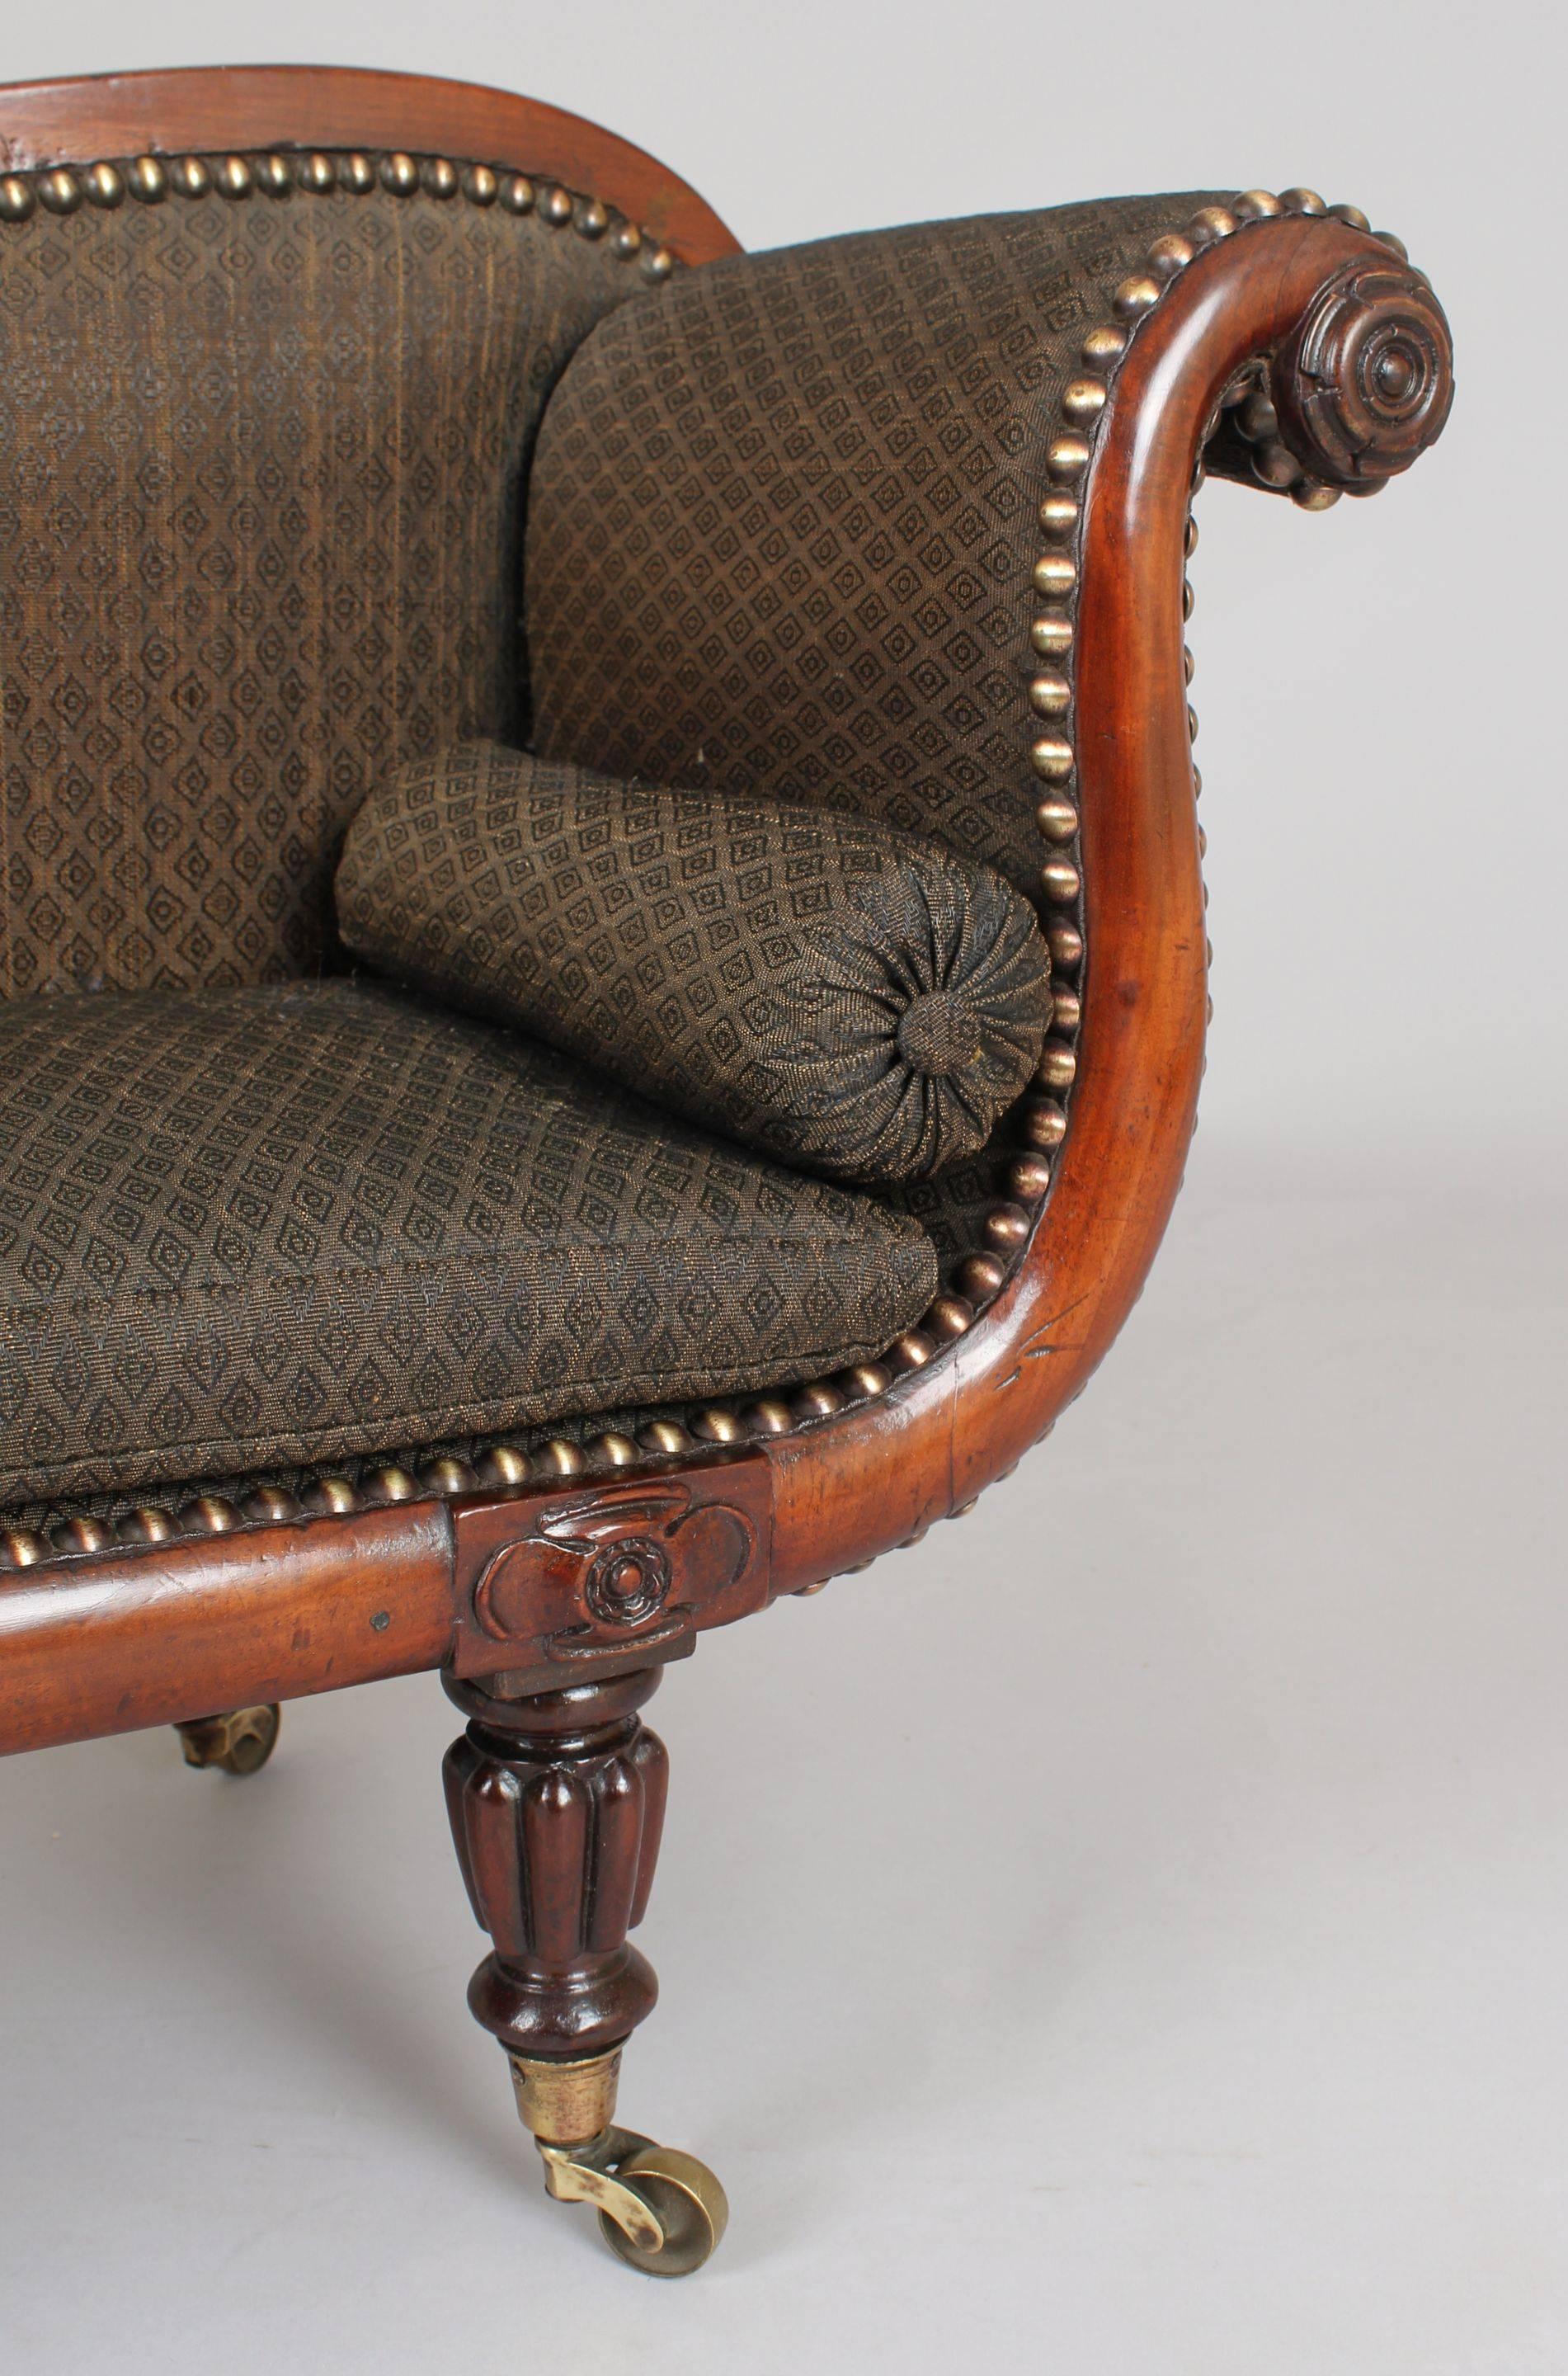 Rare George IV period mahogany miniature sofa; the finely proportioned scroll-ended frame with carved rosette decoration, on four turned and reeded legs with brass cap-castors; the frame, seat squab and bolsters with their original black woven